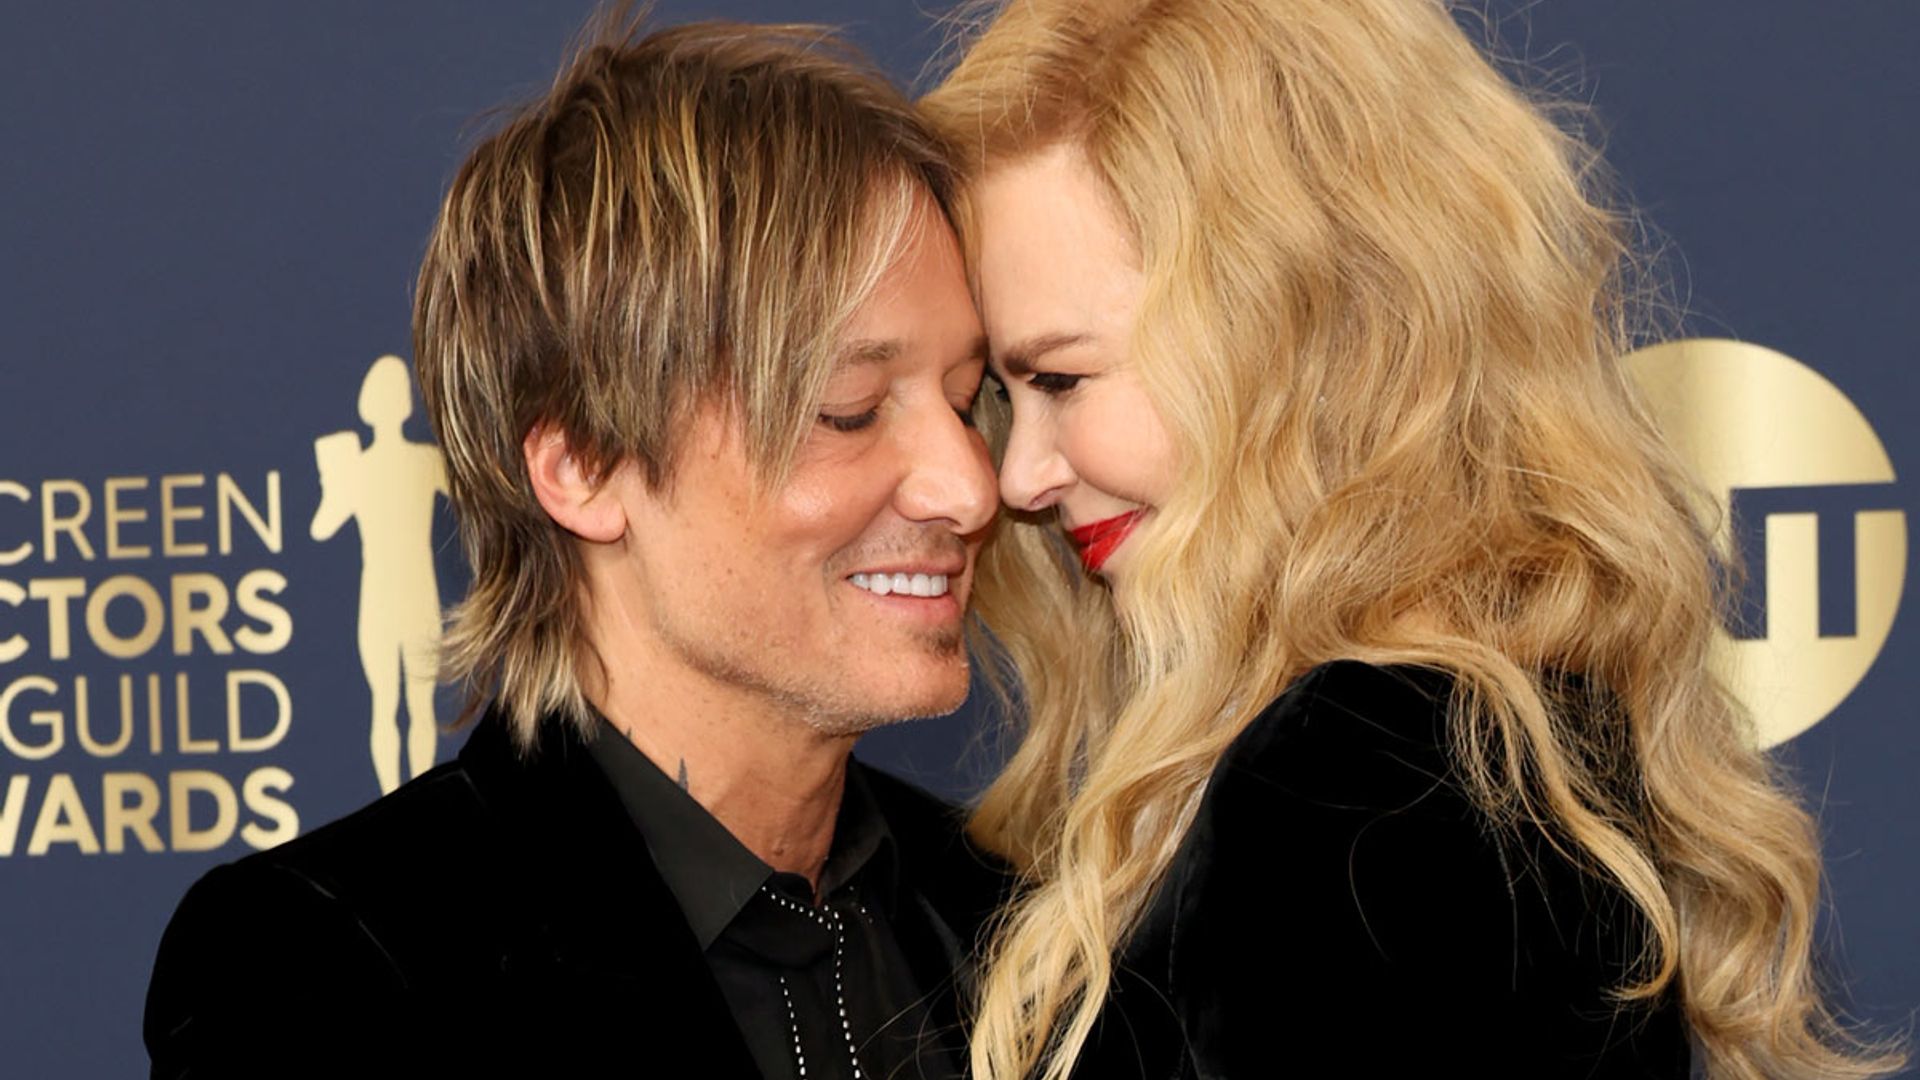 Nicole Kidman and Keith Urban twin in striking velvet outfits for SAG Awards – fans react